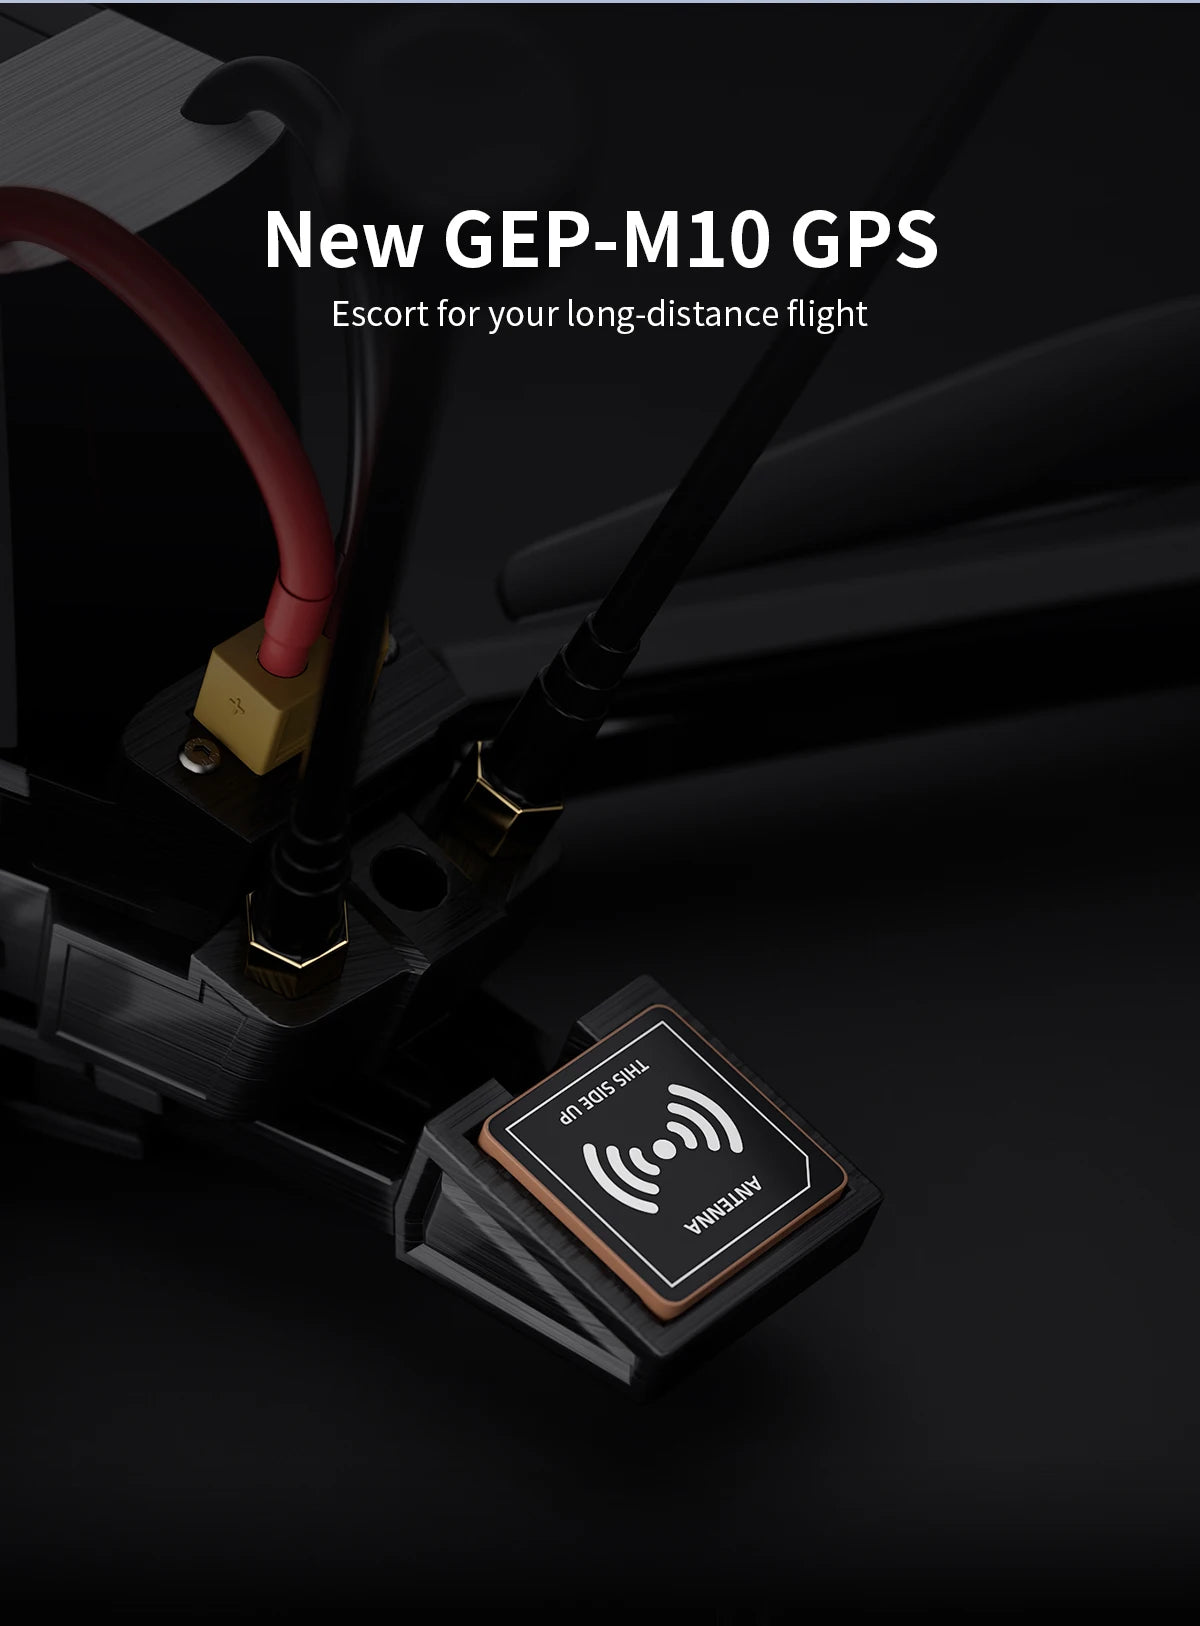 GEPRC MOZ7 Analog, GEP-M1O GPS Escort for your long-distance flight 8